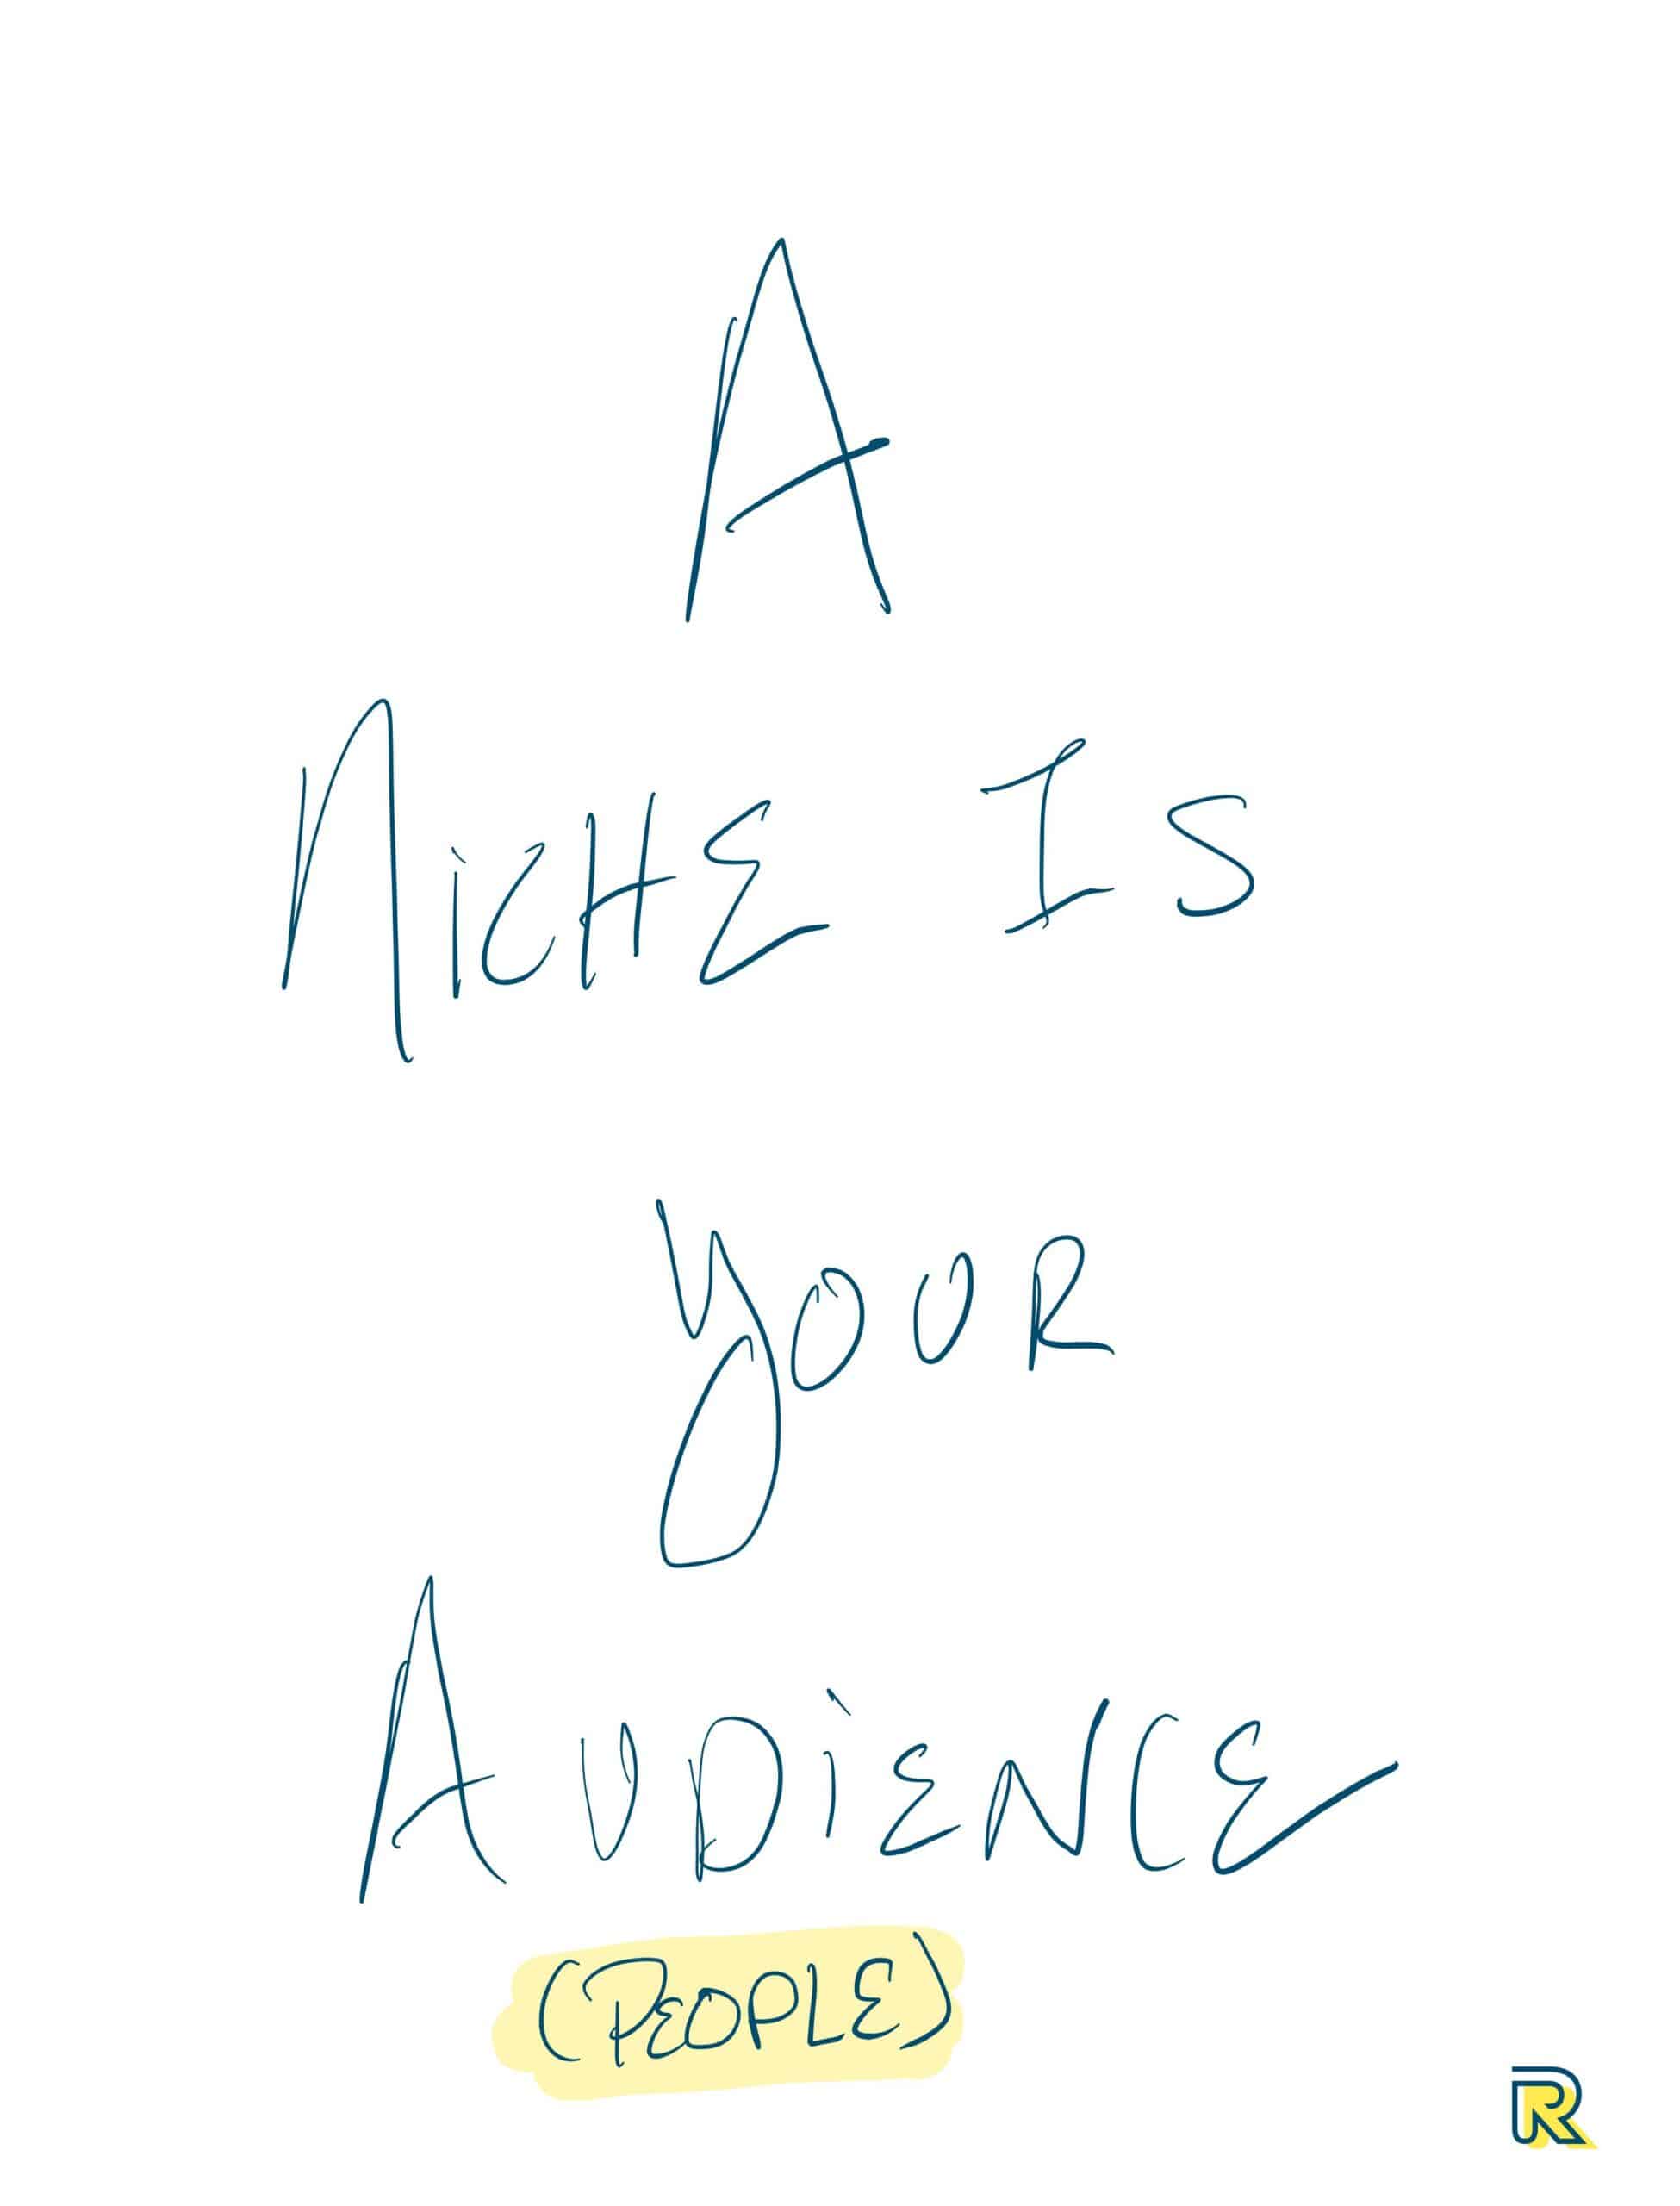 niche is your audience